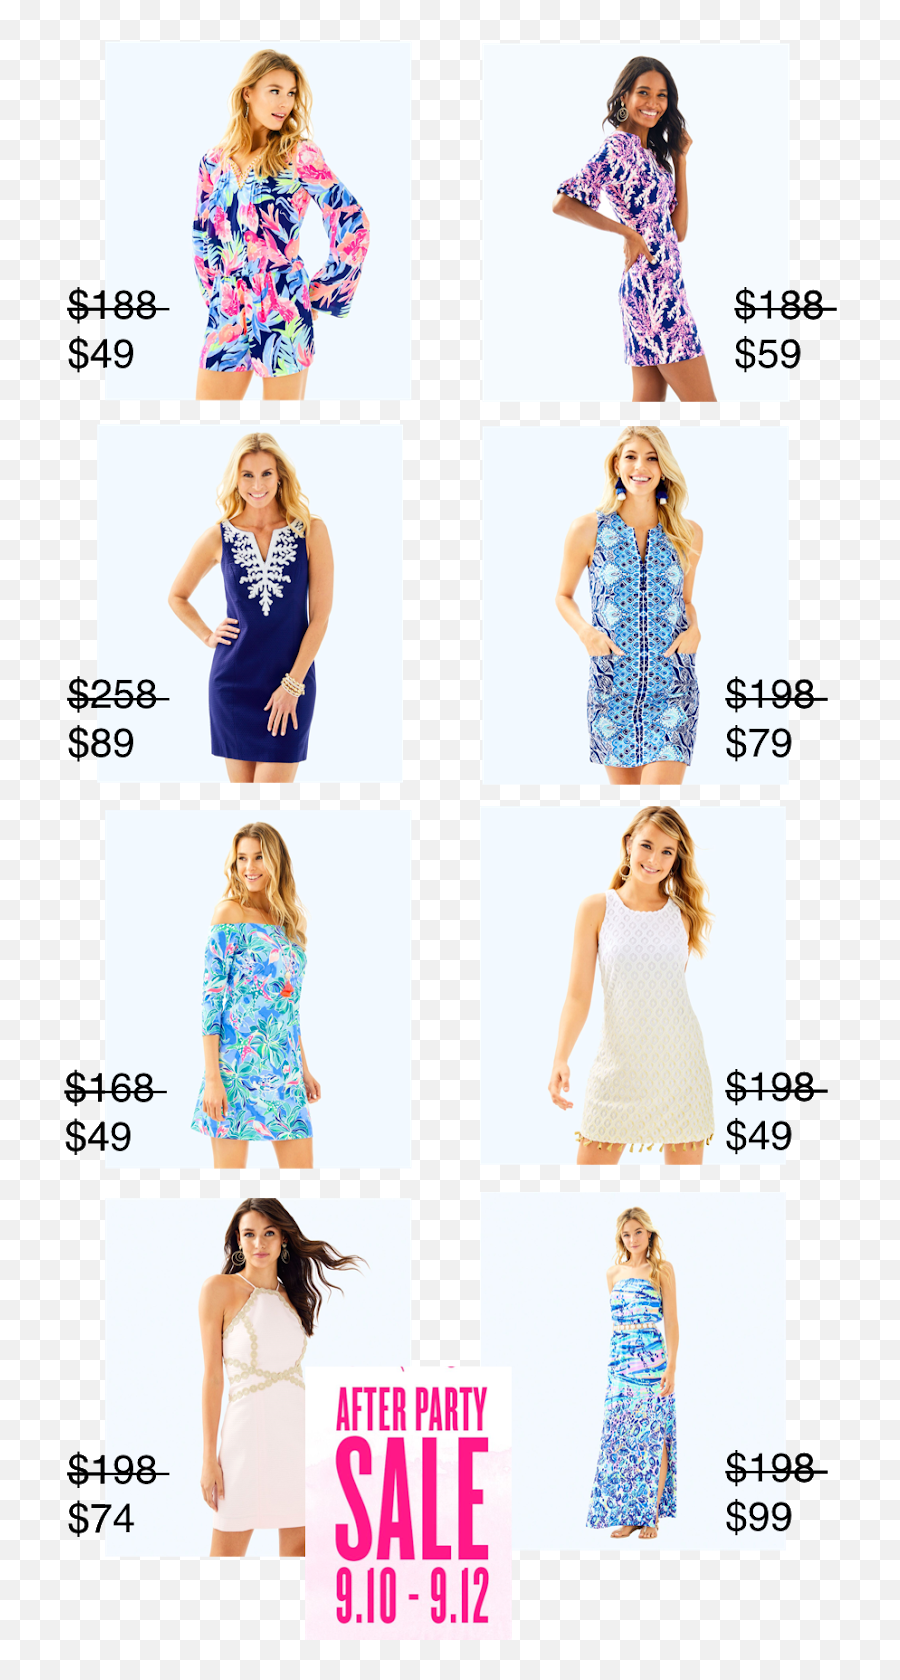 Lilly Pulitzer After Party Sale 2018 - For Women Emoji,Sametime Emoticon Afterparty